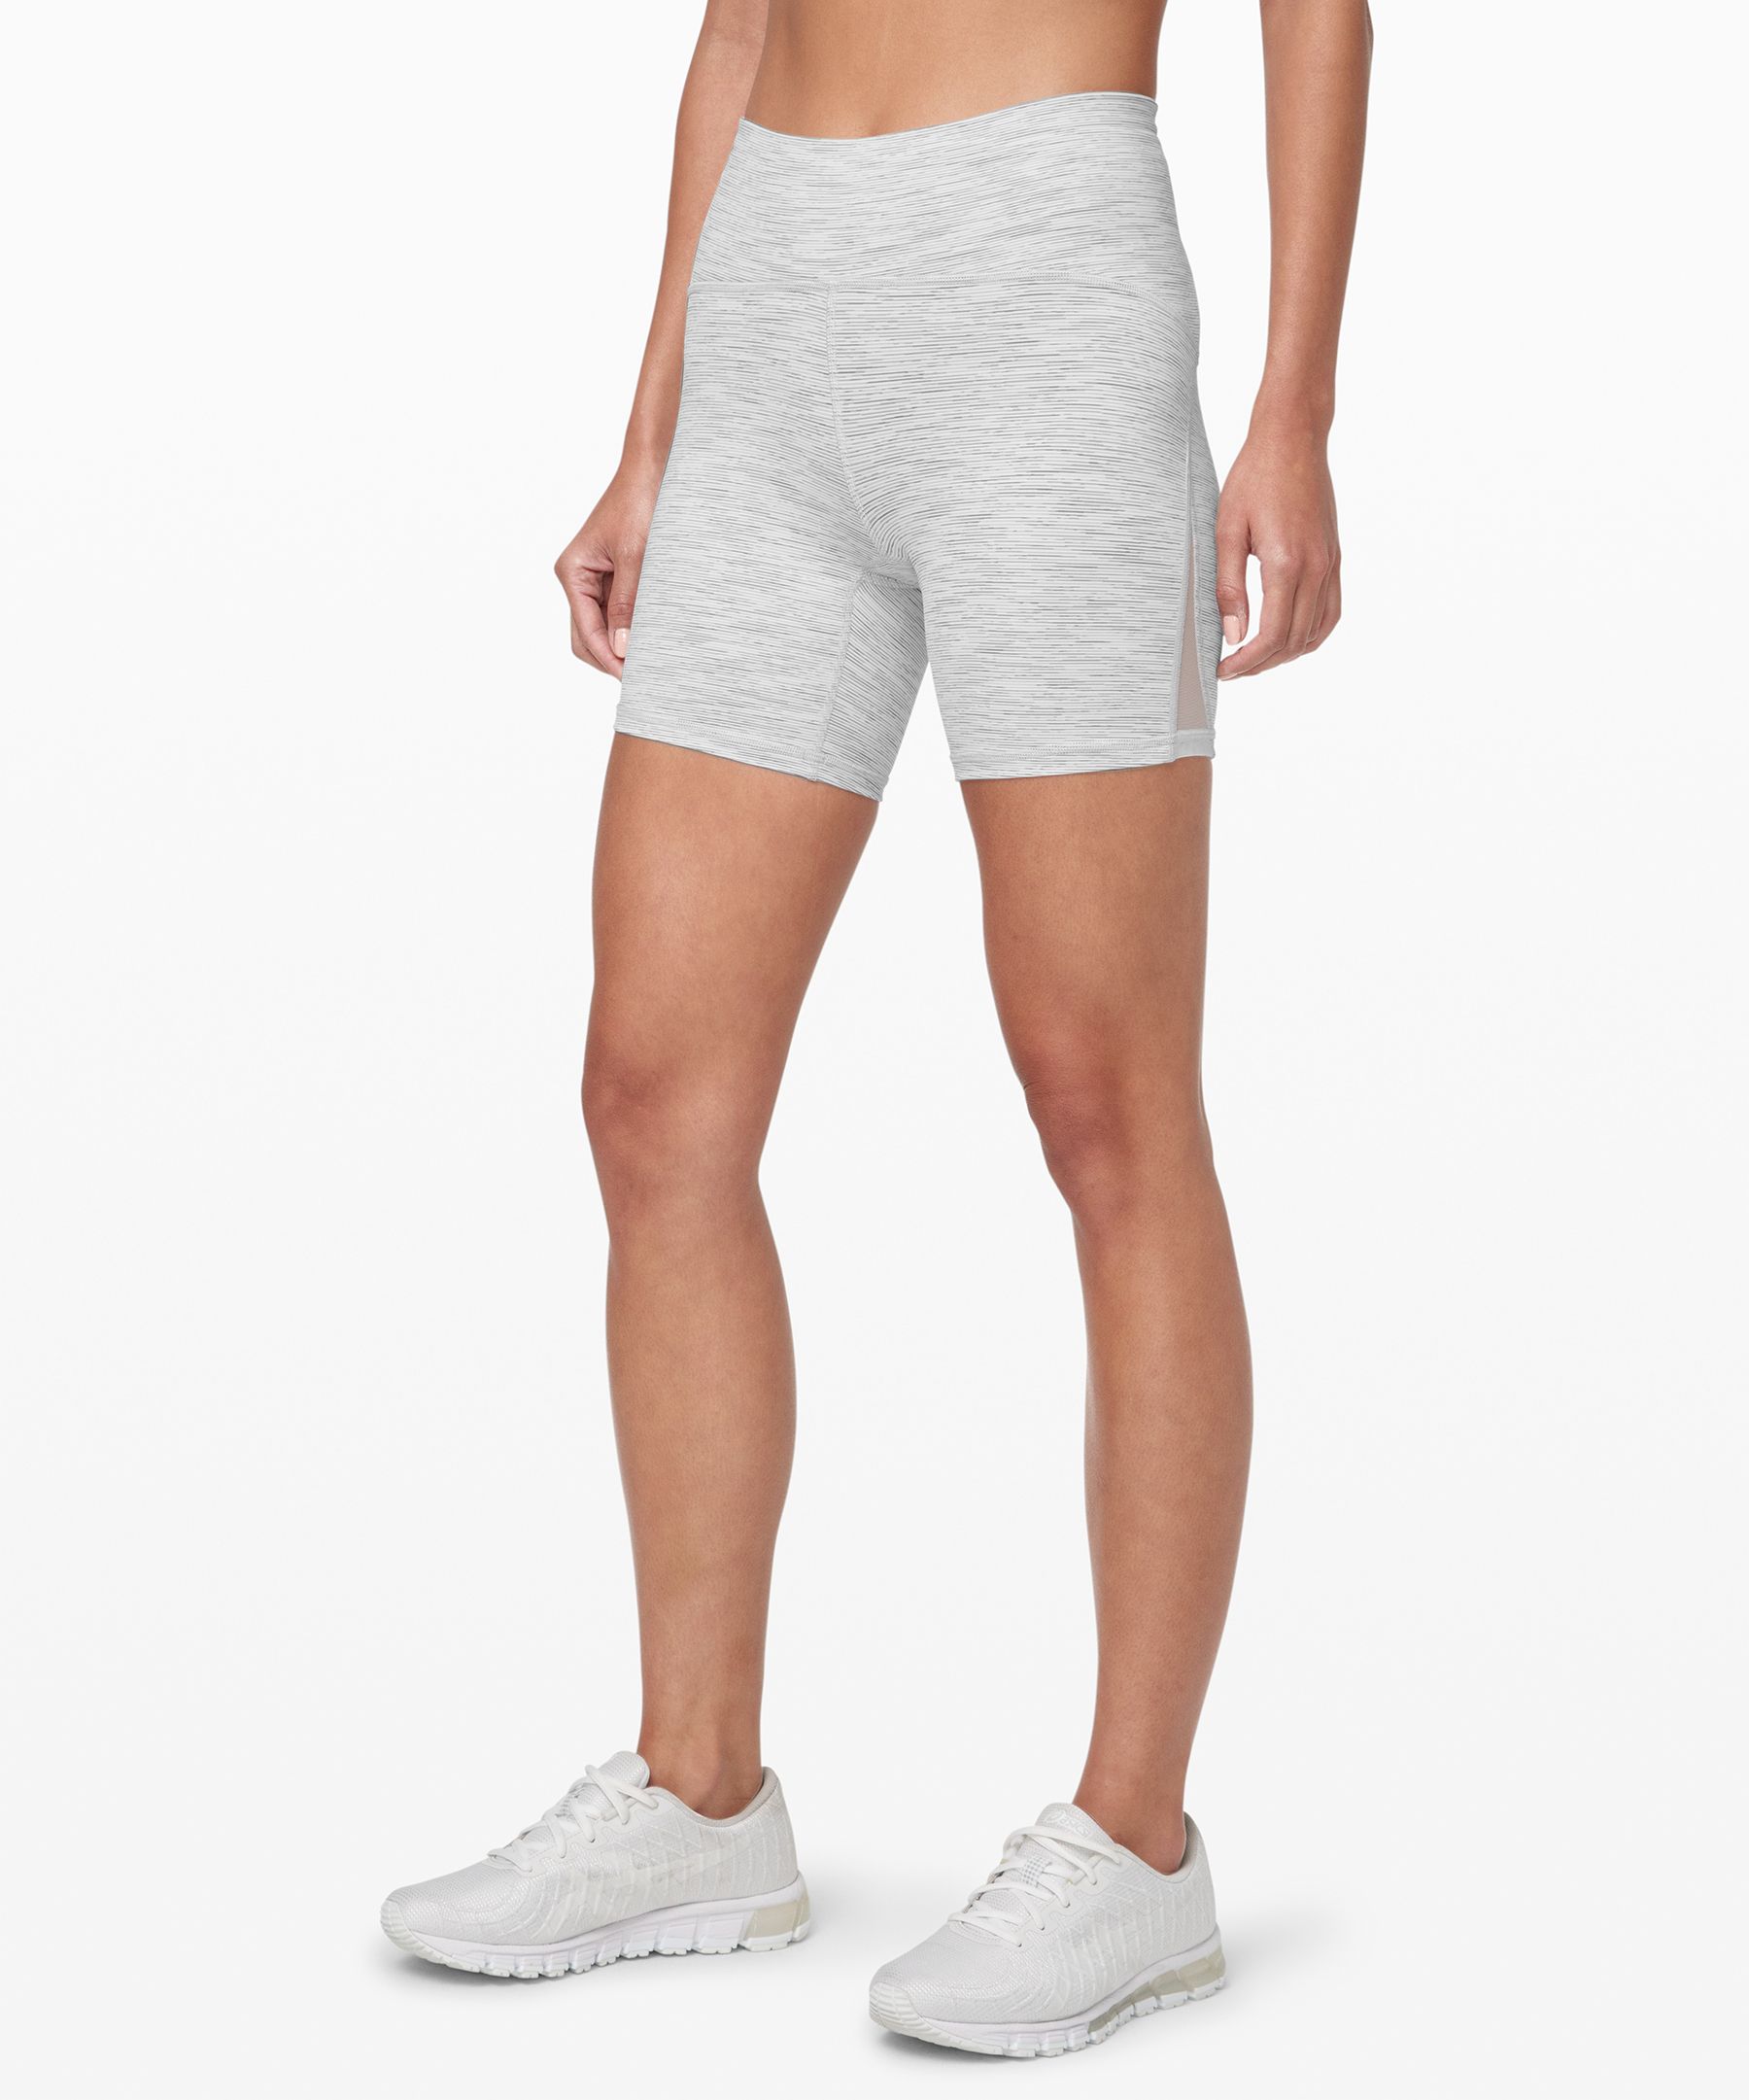 over and above train short lululemon